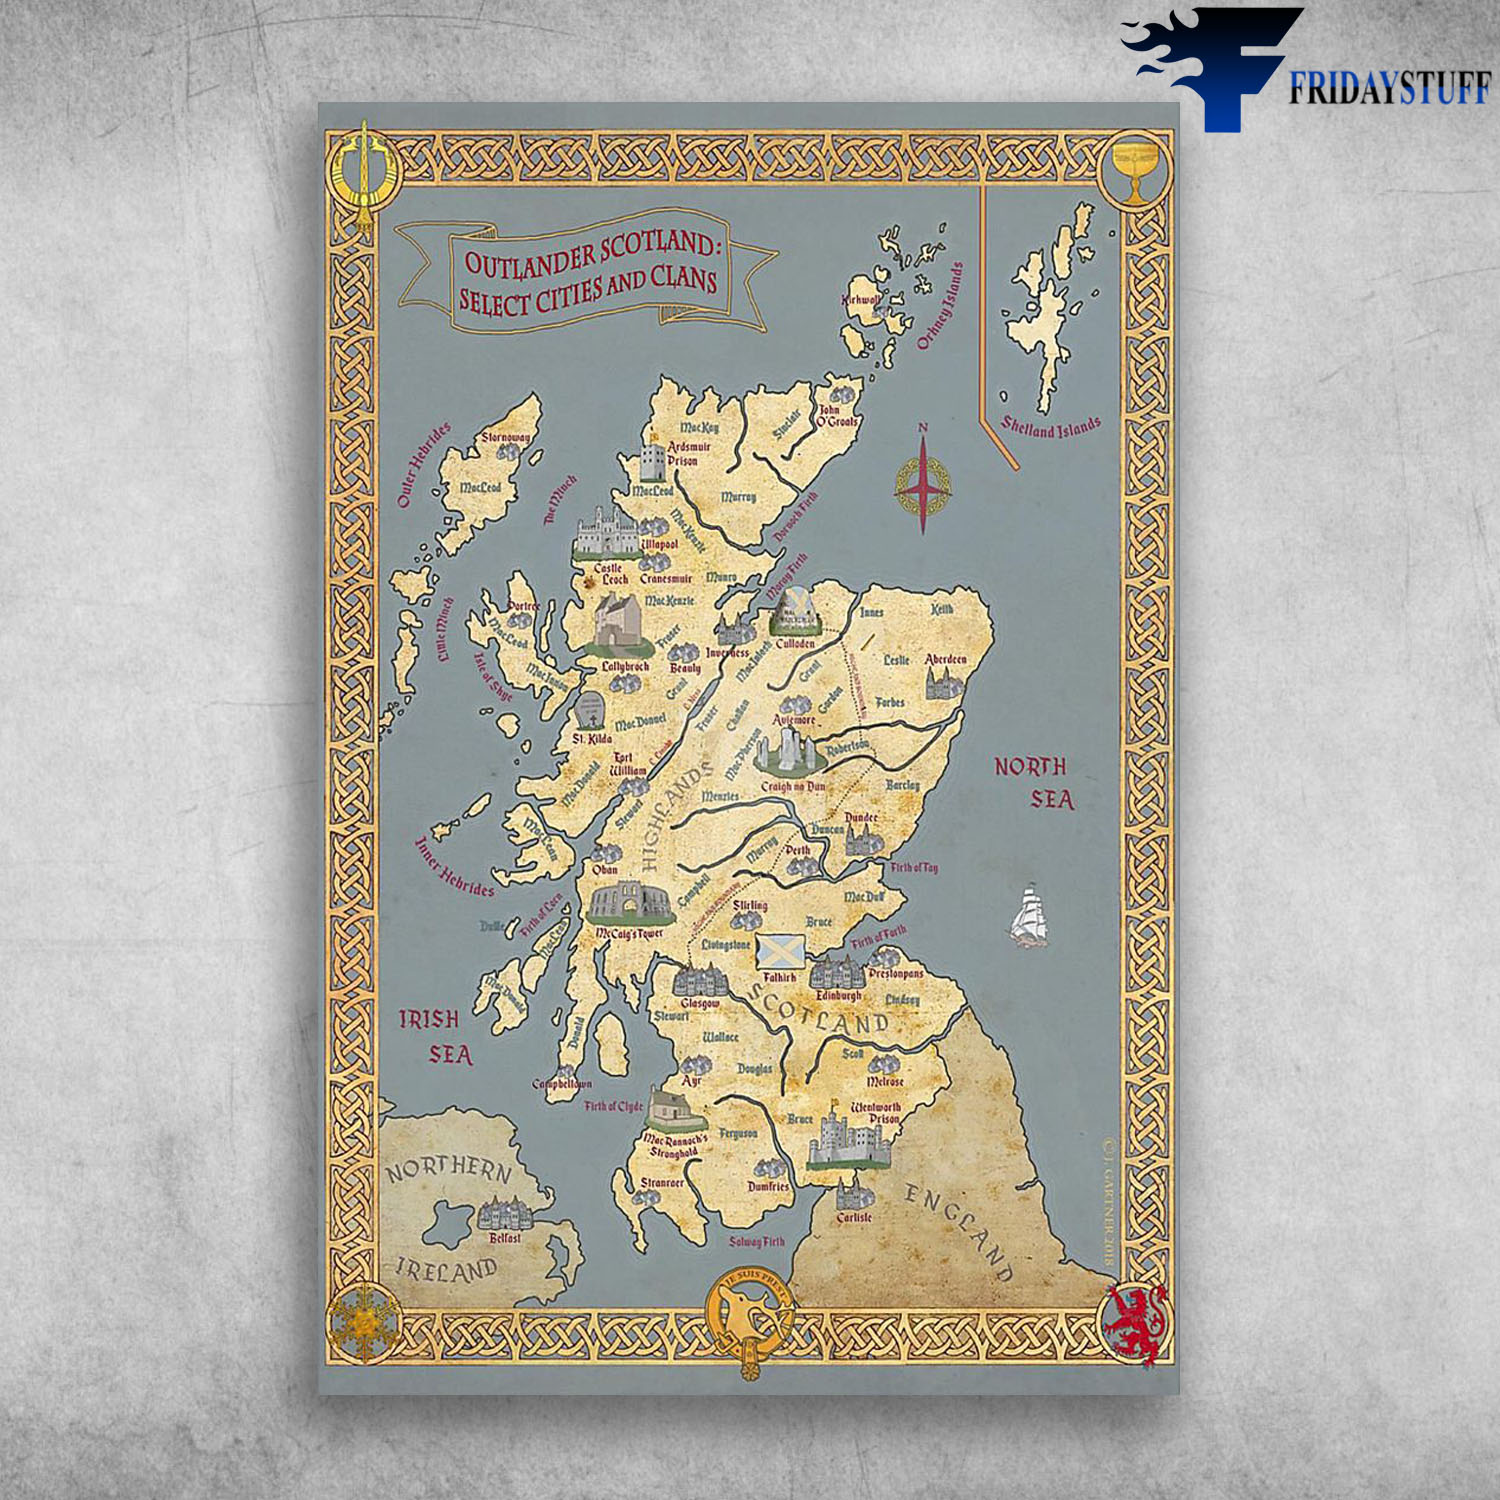 Scotland Map Outlander Scotland Select Cities And Clans